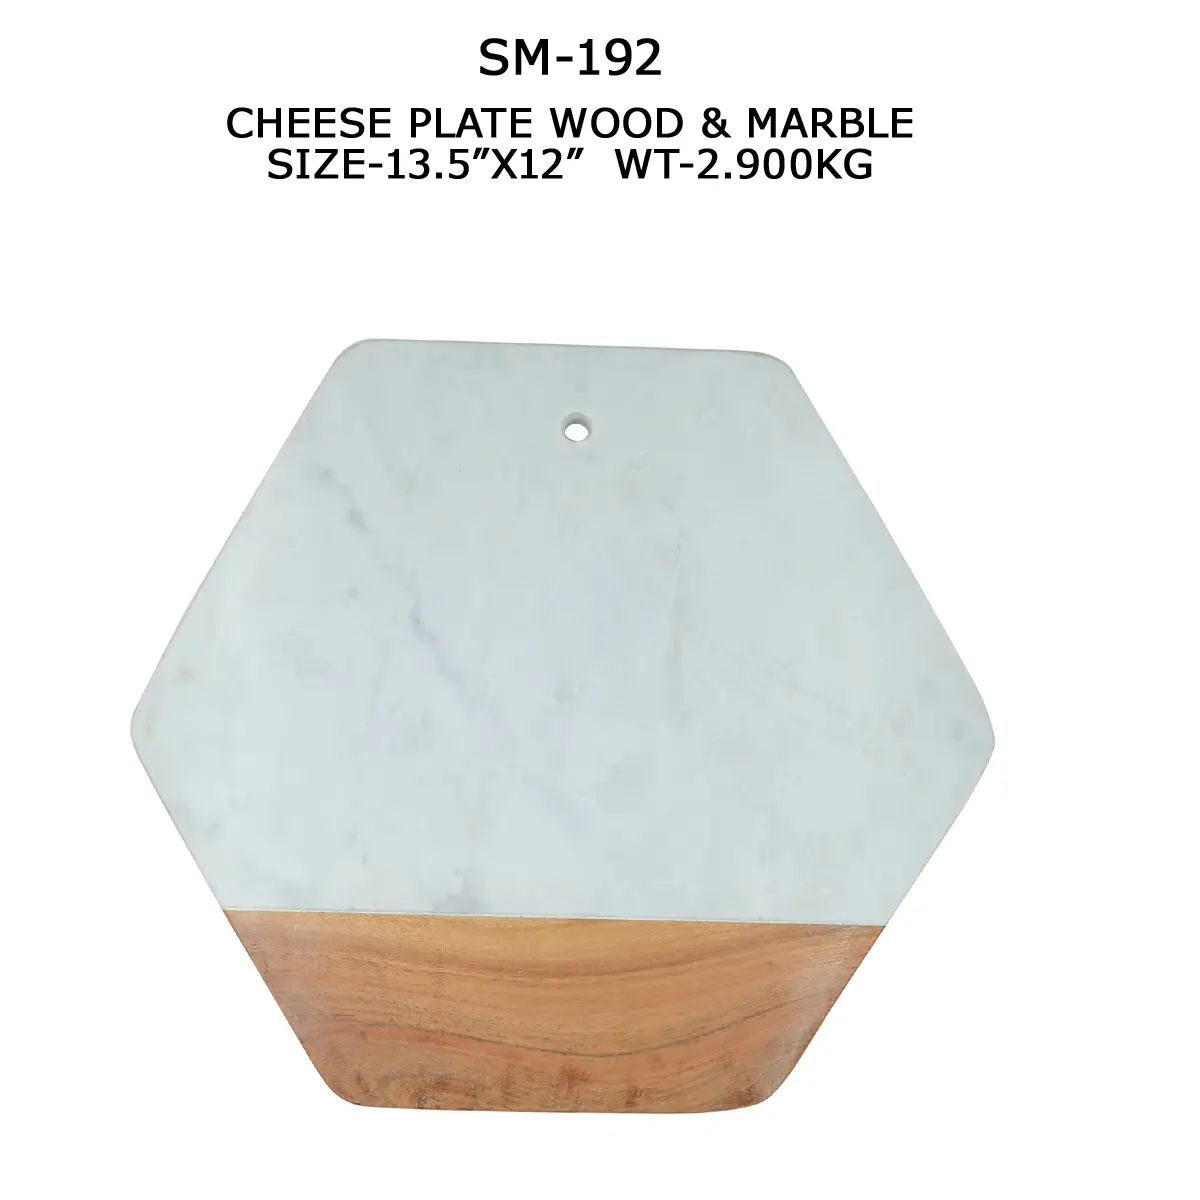 CHEESE PLATE WHITE MARBLE & WOOD